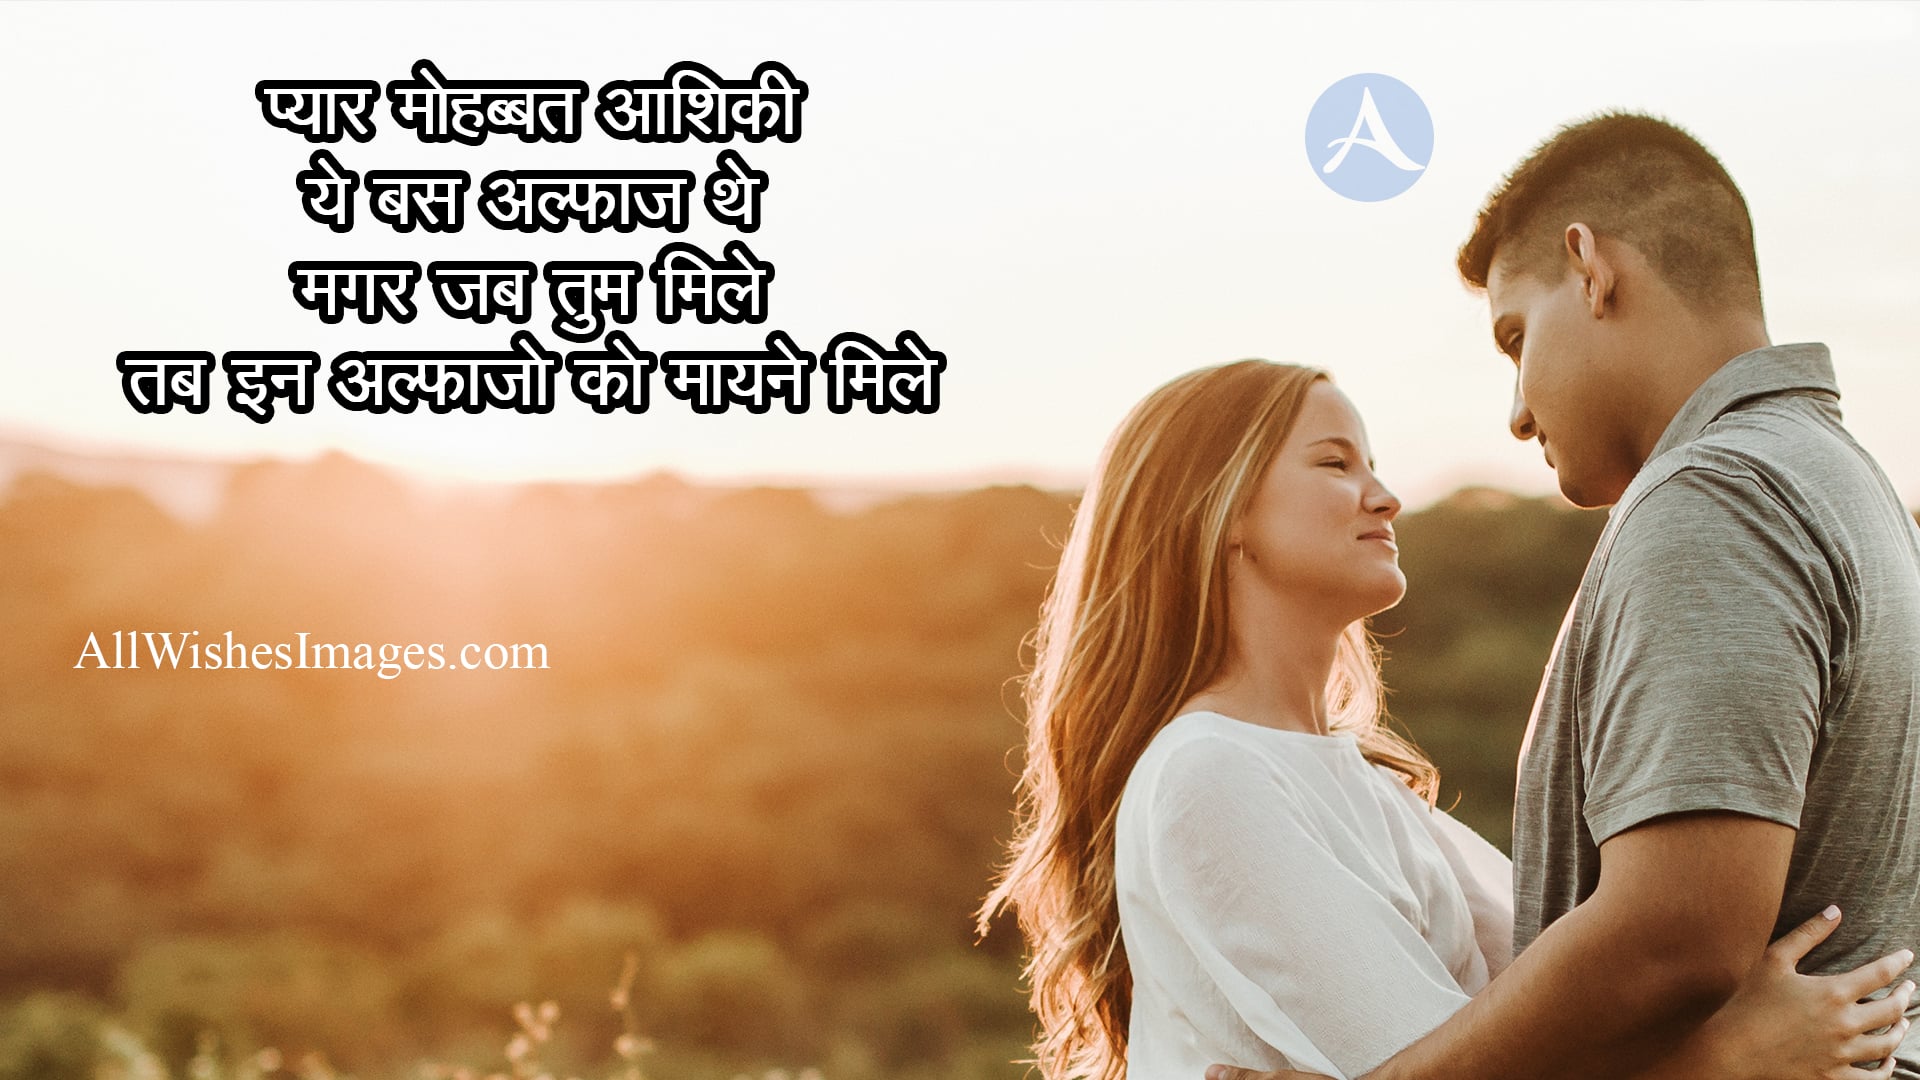 Love Shayari Download - All Wishes Images - Images for WhatsApp